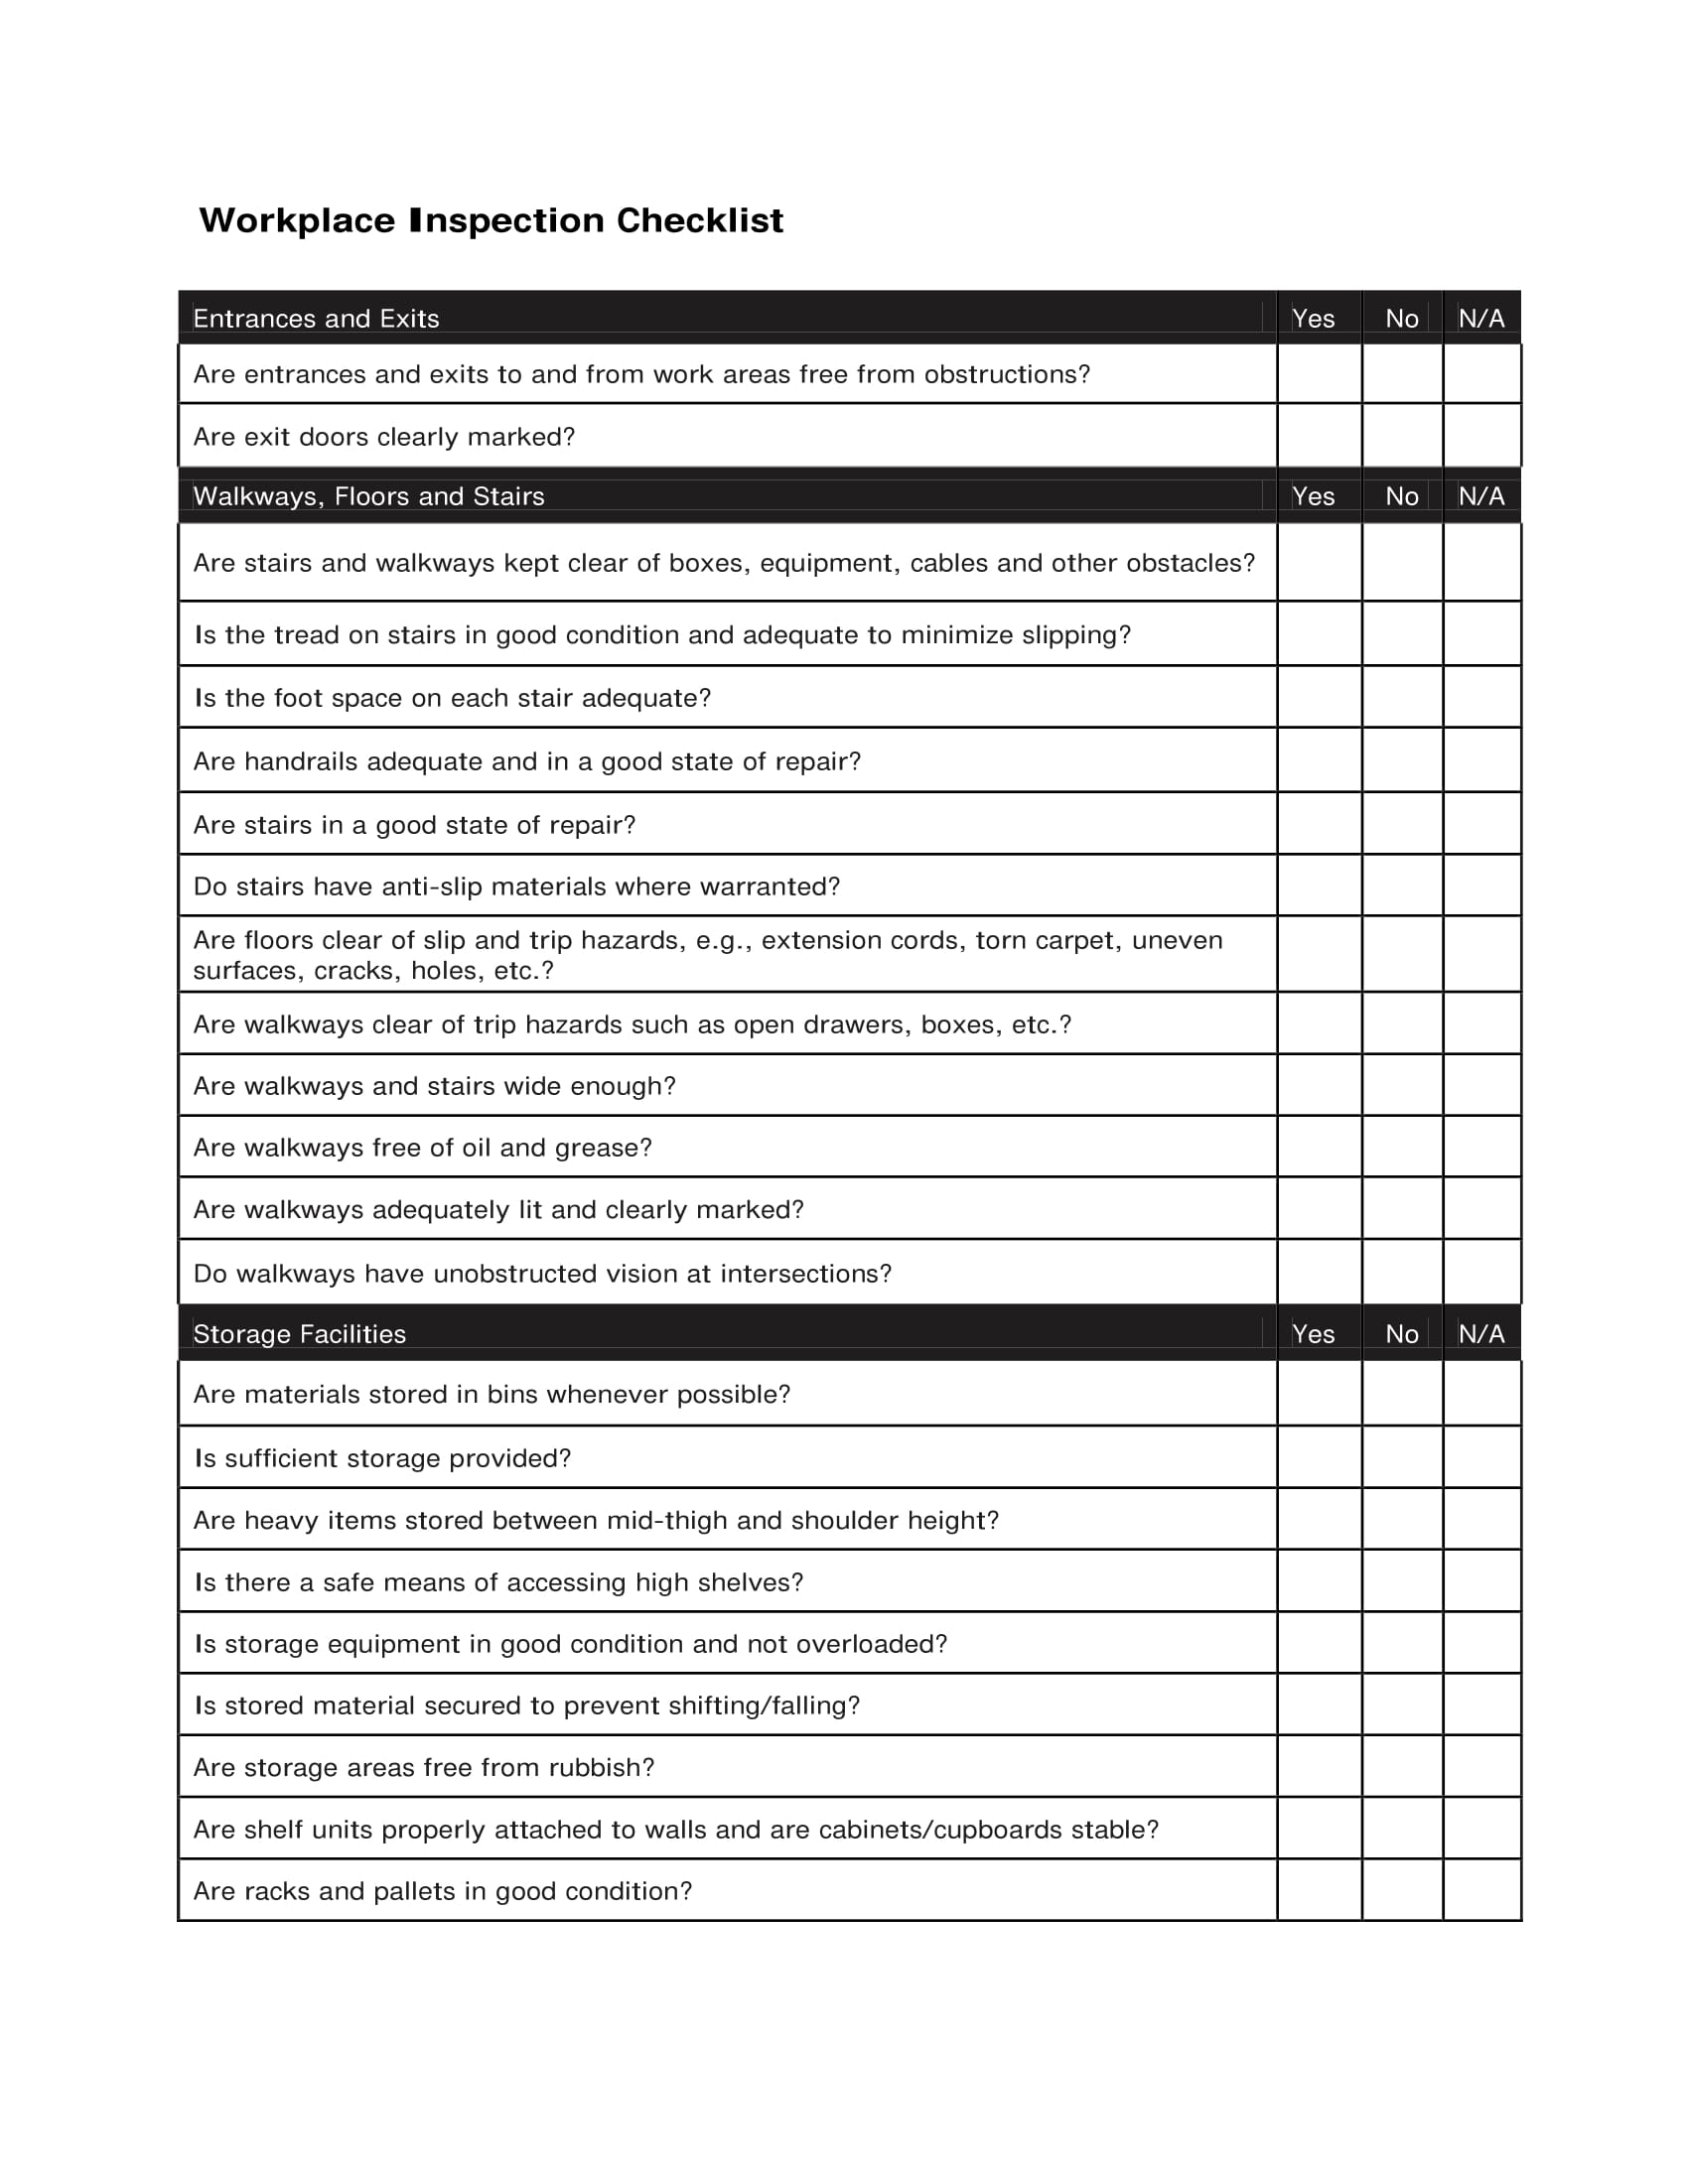 Workplace Inspection Checklist Template TUTORE ORG Master of Documents